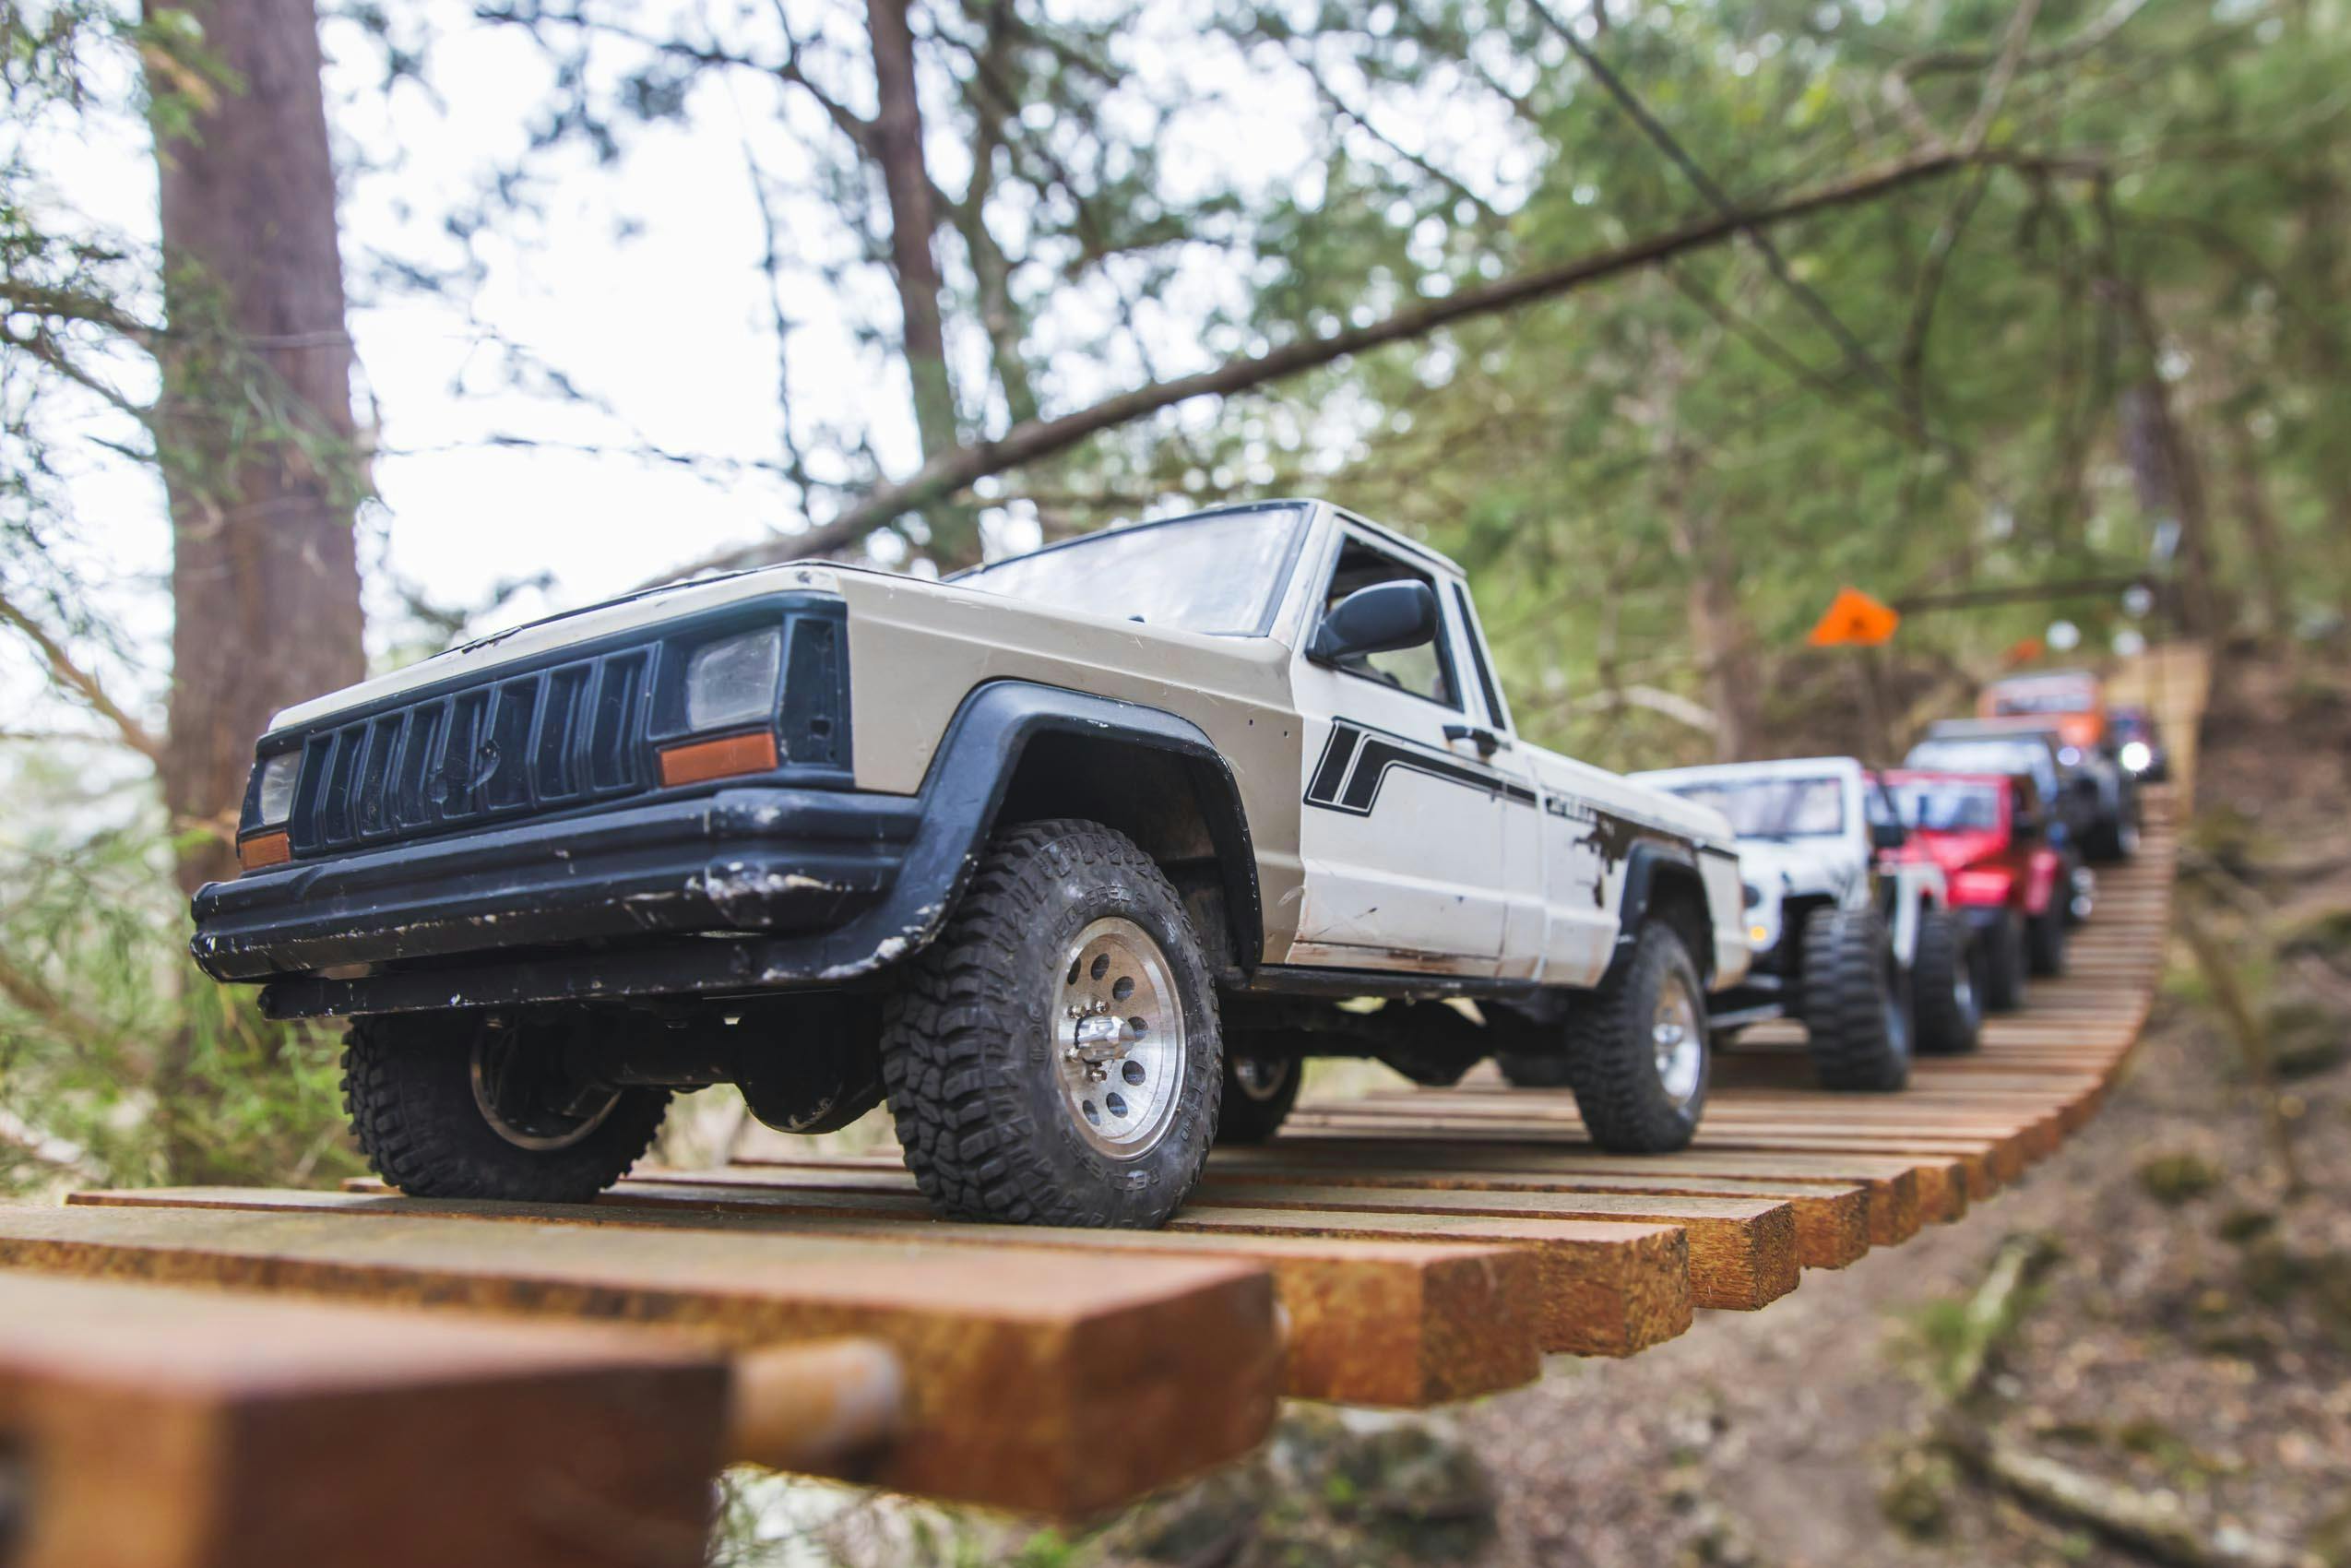 Scale RC Crawlers RCs lined up on suspension bridge